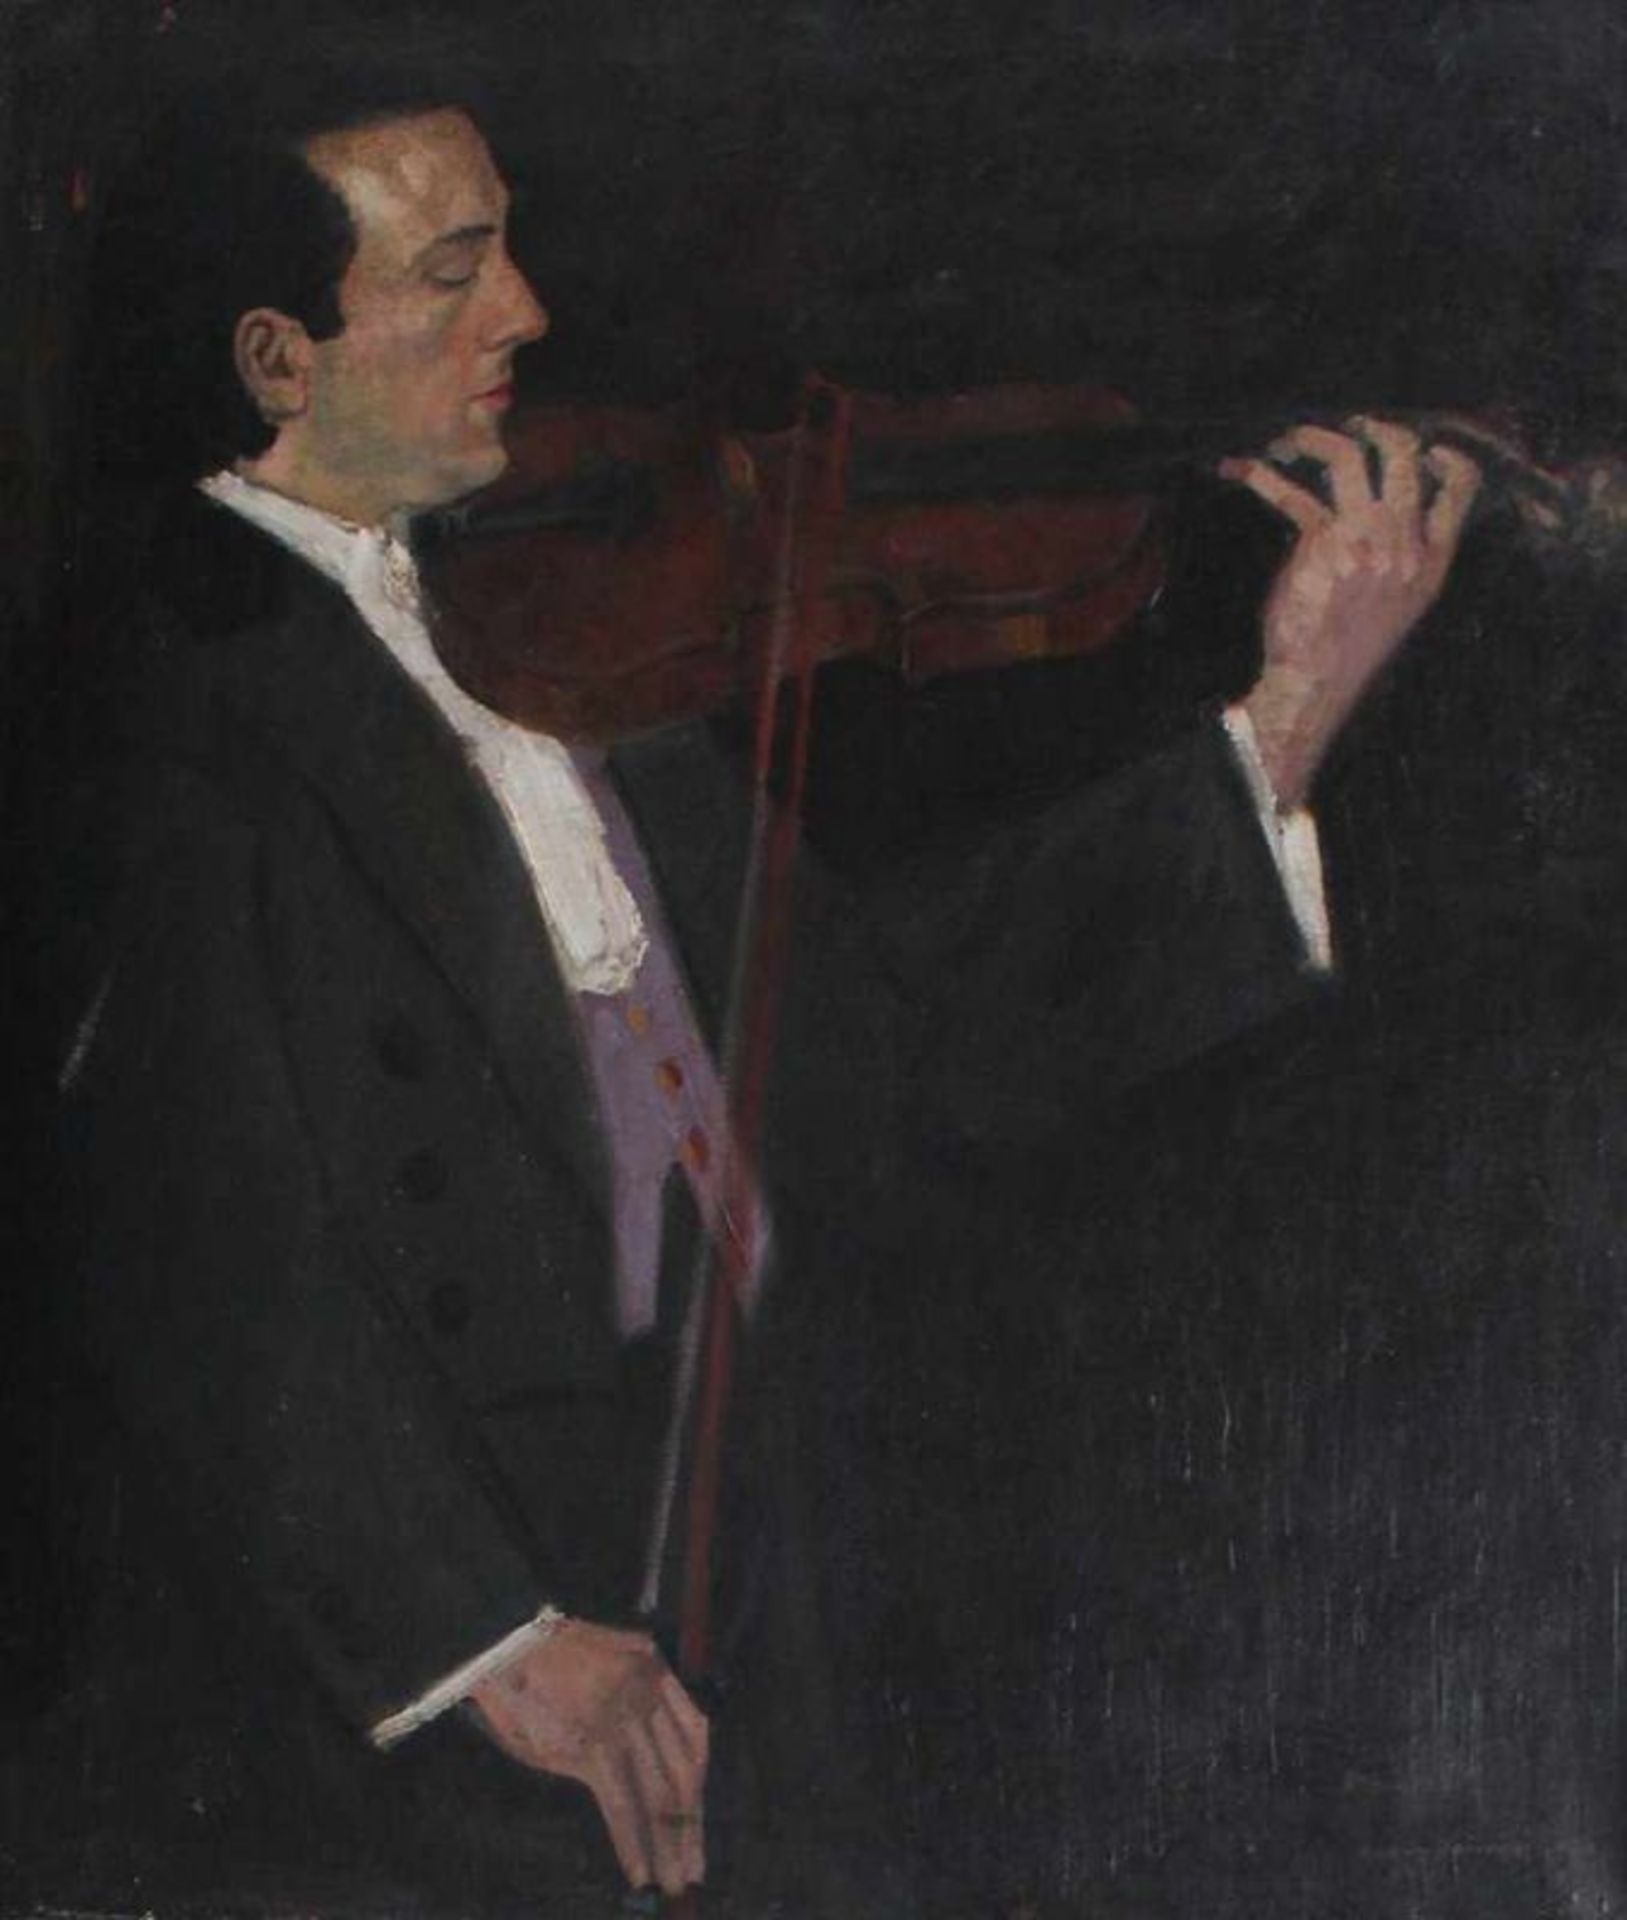 Mürzlli Georg Egmont Oehme (1890-1955), Portrait of a violinist at a performance at the Music